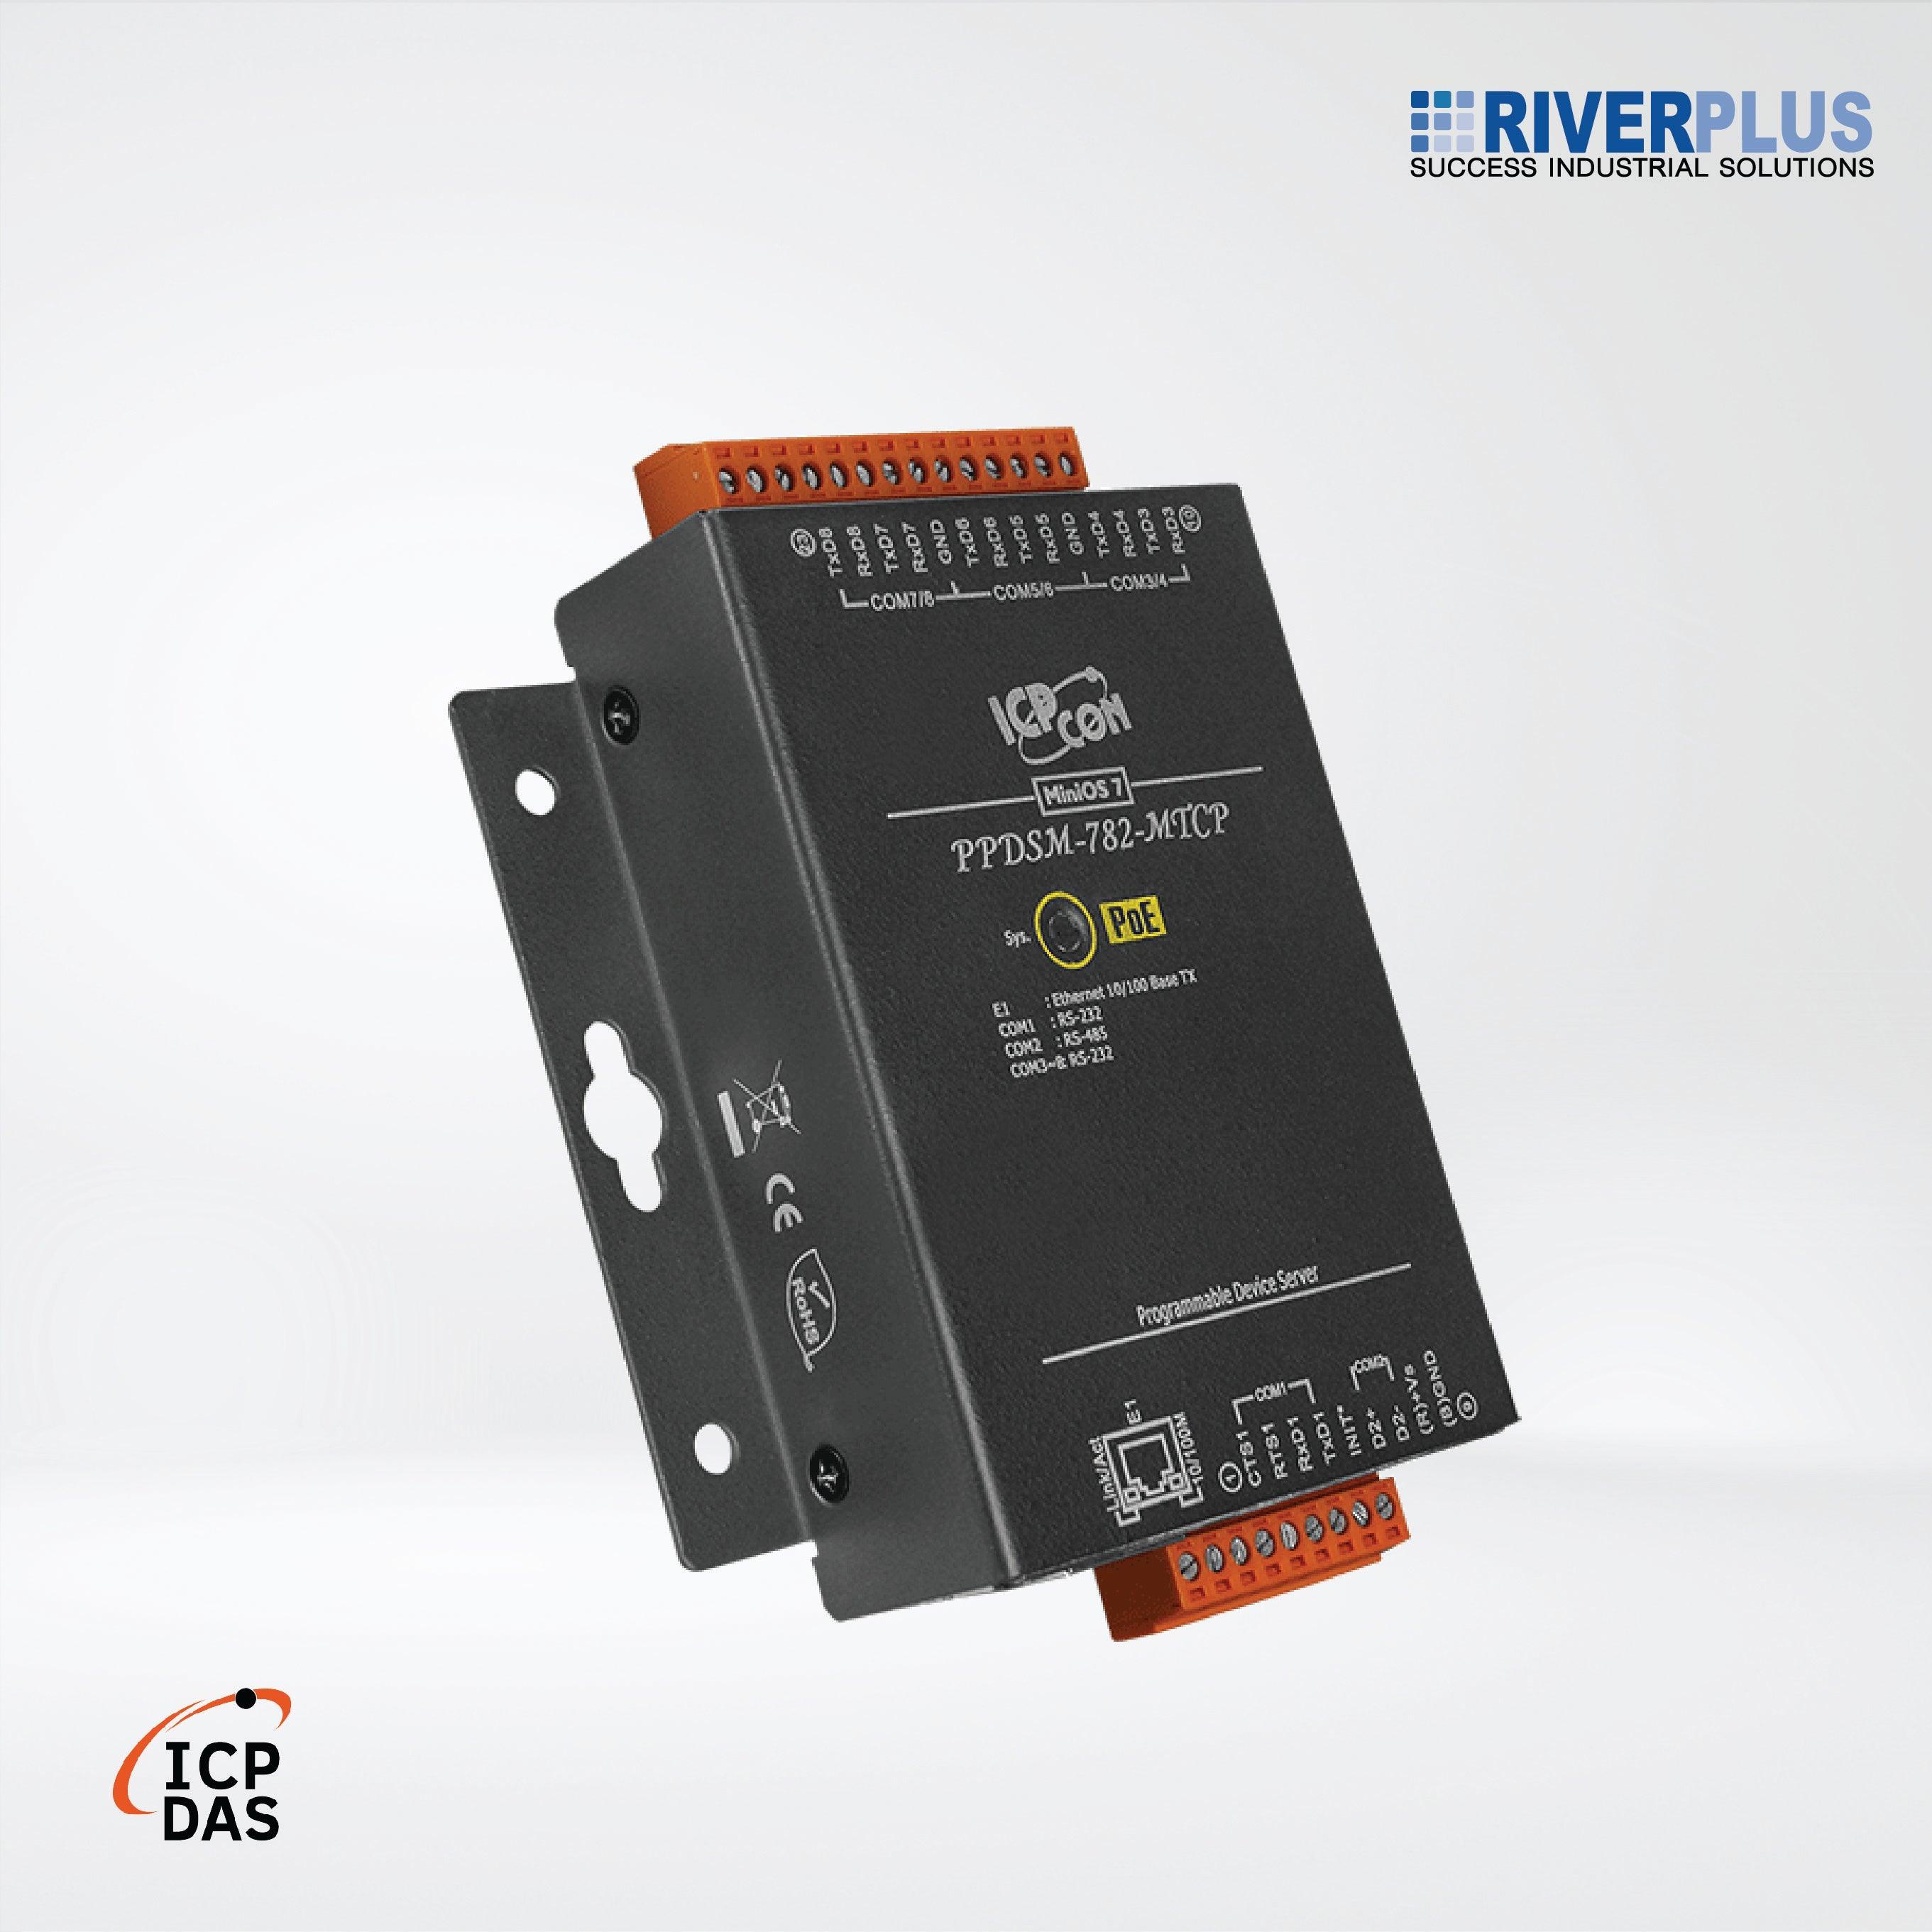 PPDSM-782-MTCP Programmable (7x RS-232 and 1x RS-485) Serial-to-Ethernet Device Server - Riverplus